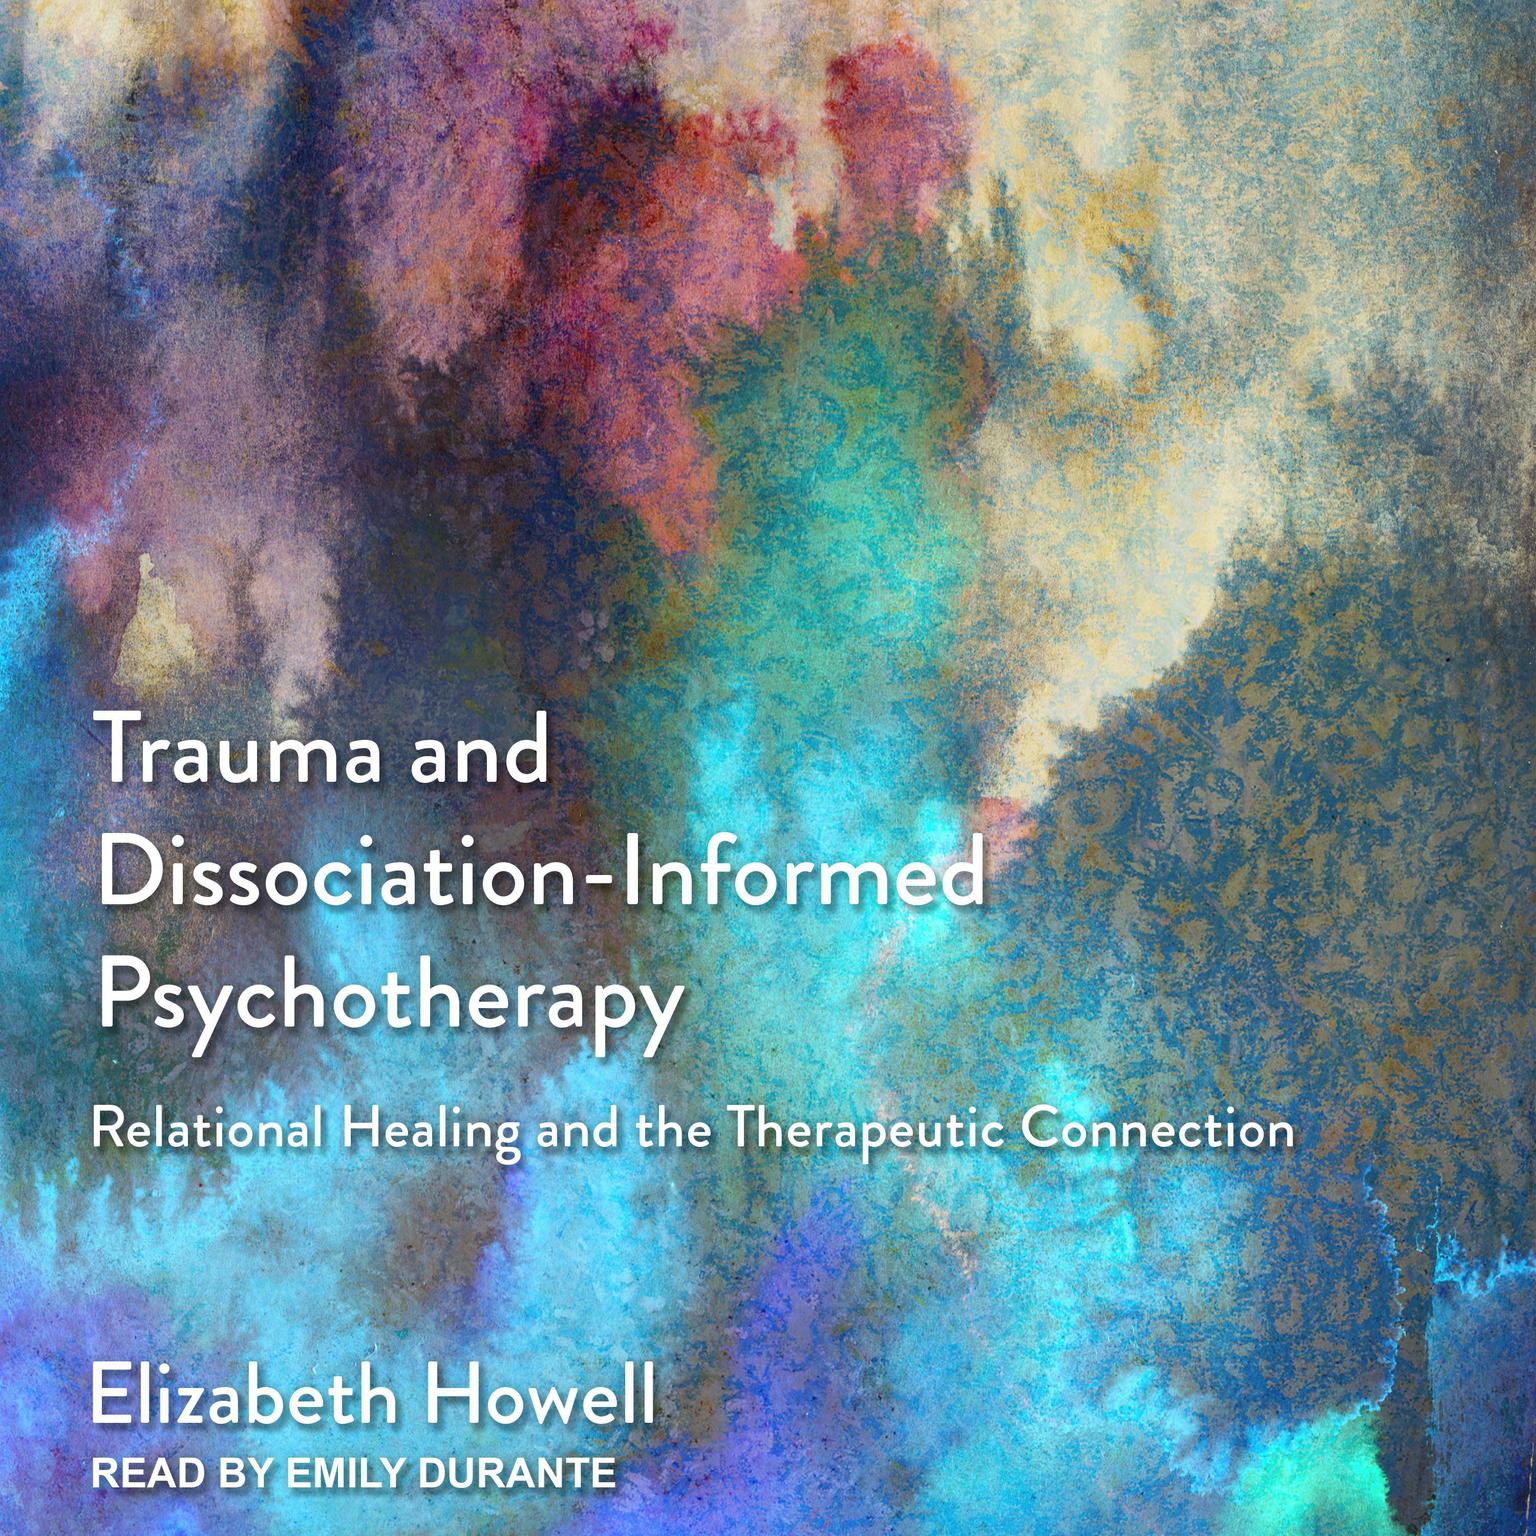 Trauma and Dissociation-Informed Psychotherapy: Relational Healing and the Therapeutic Connection Audiobook, by Elizabeth Howell